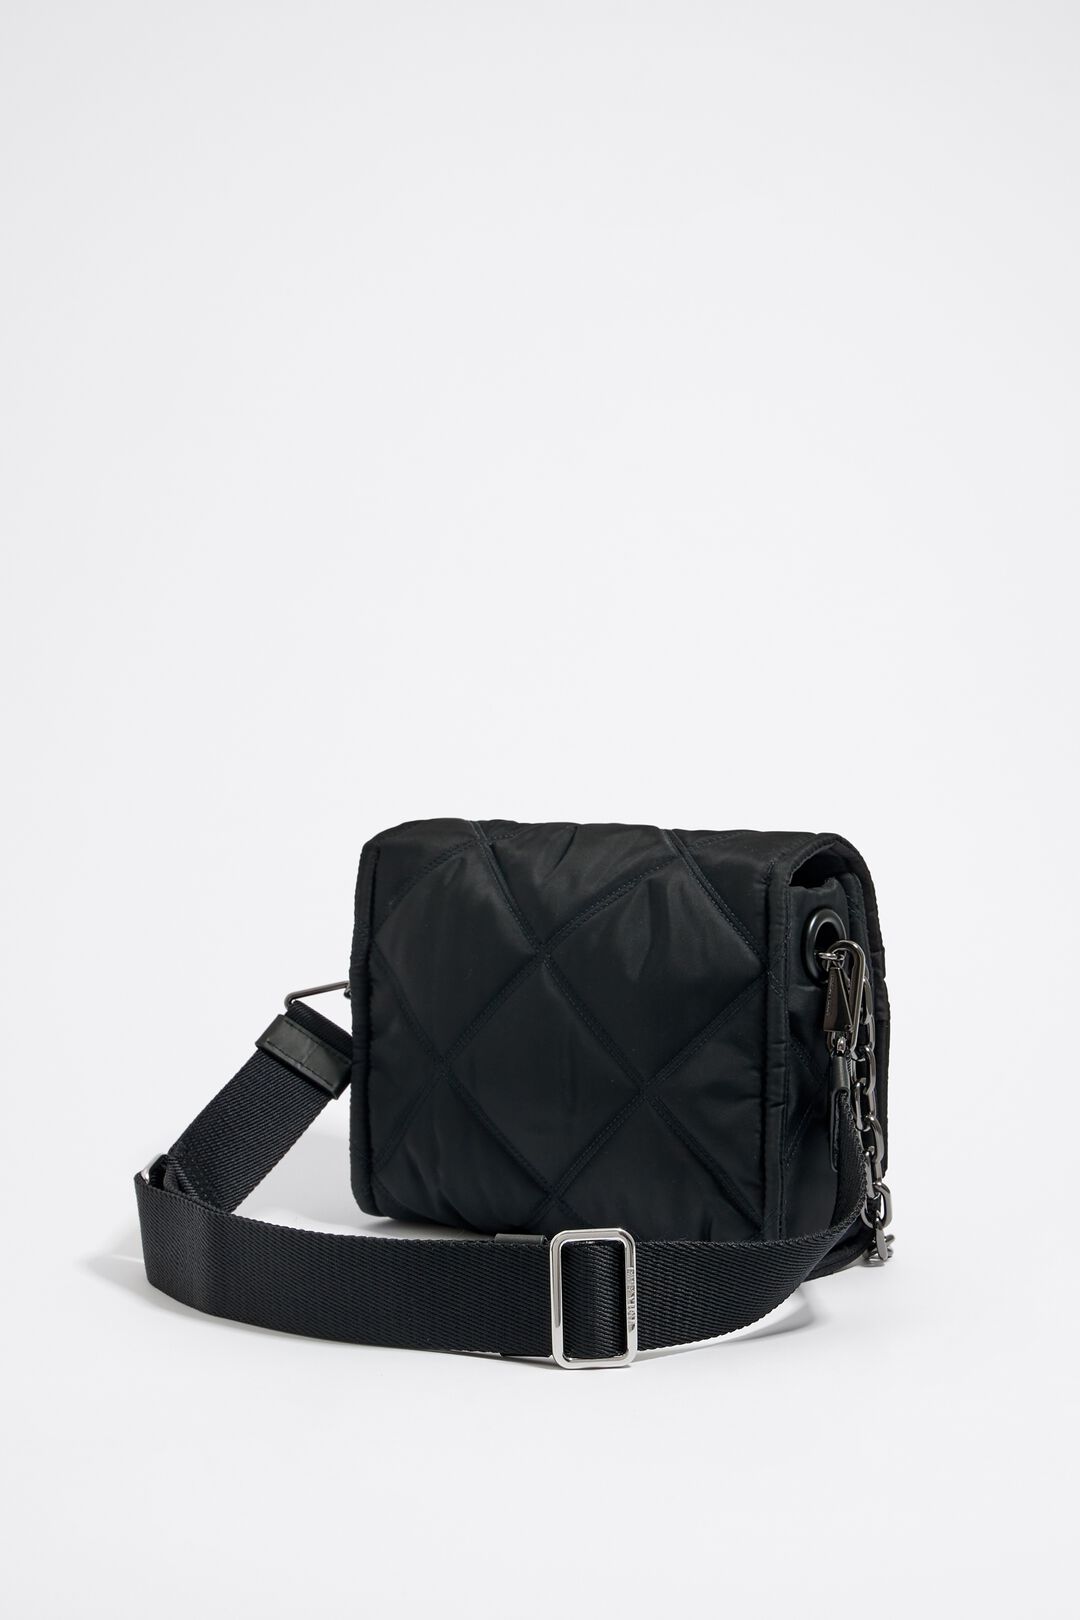 Grab Our Crossbody Bags For Women